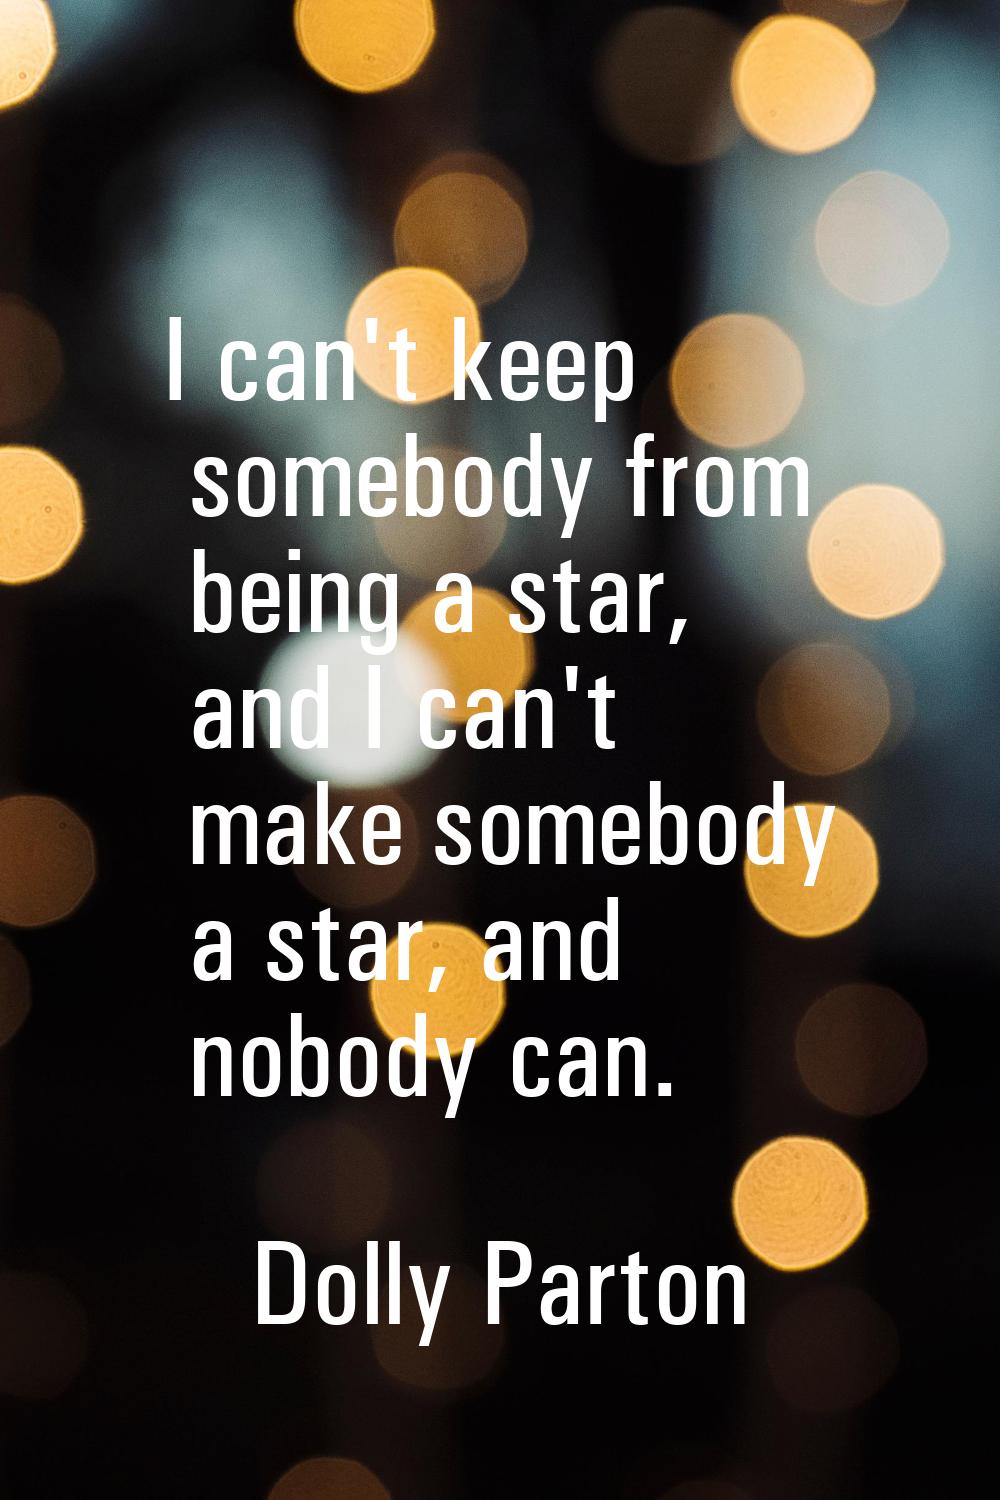 I can't keep somebody from being a star, and I can't make somebody a star, and nobody can.